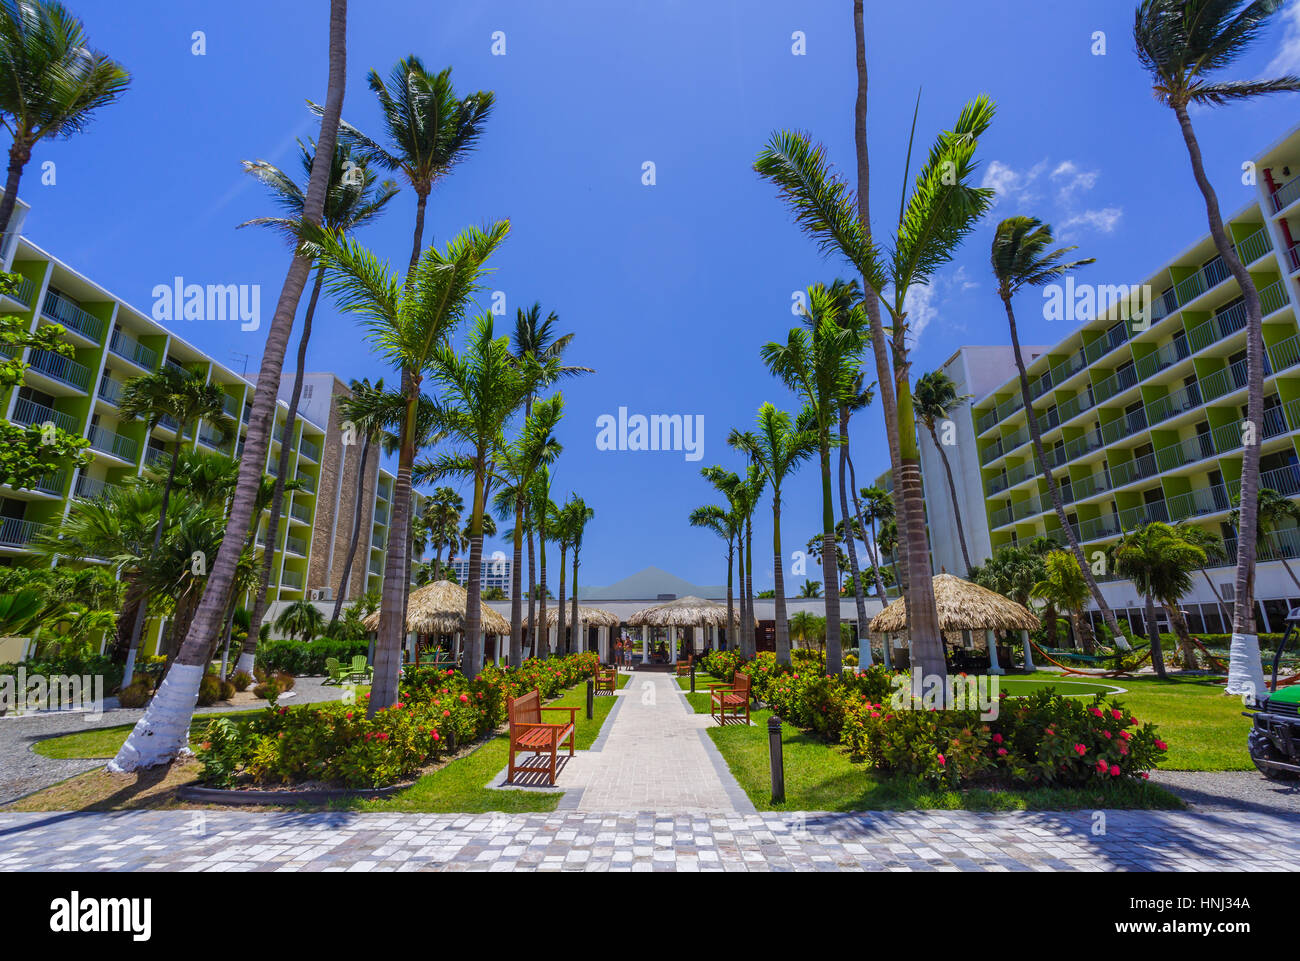 Walking path with palm trees at tropical beach in Aruba Stock Photo